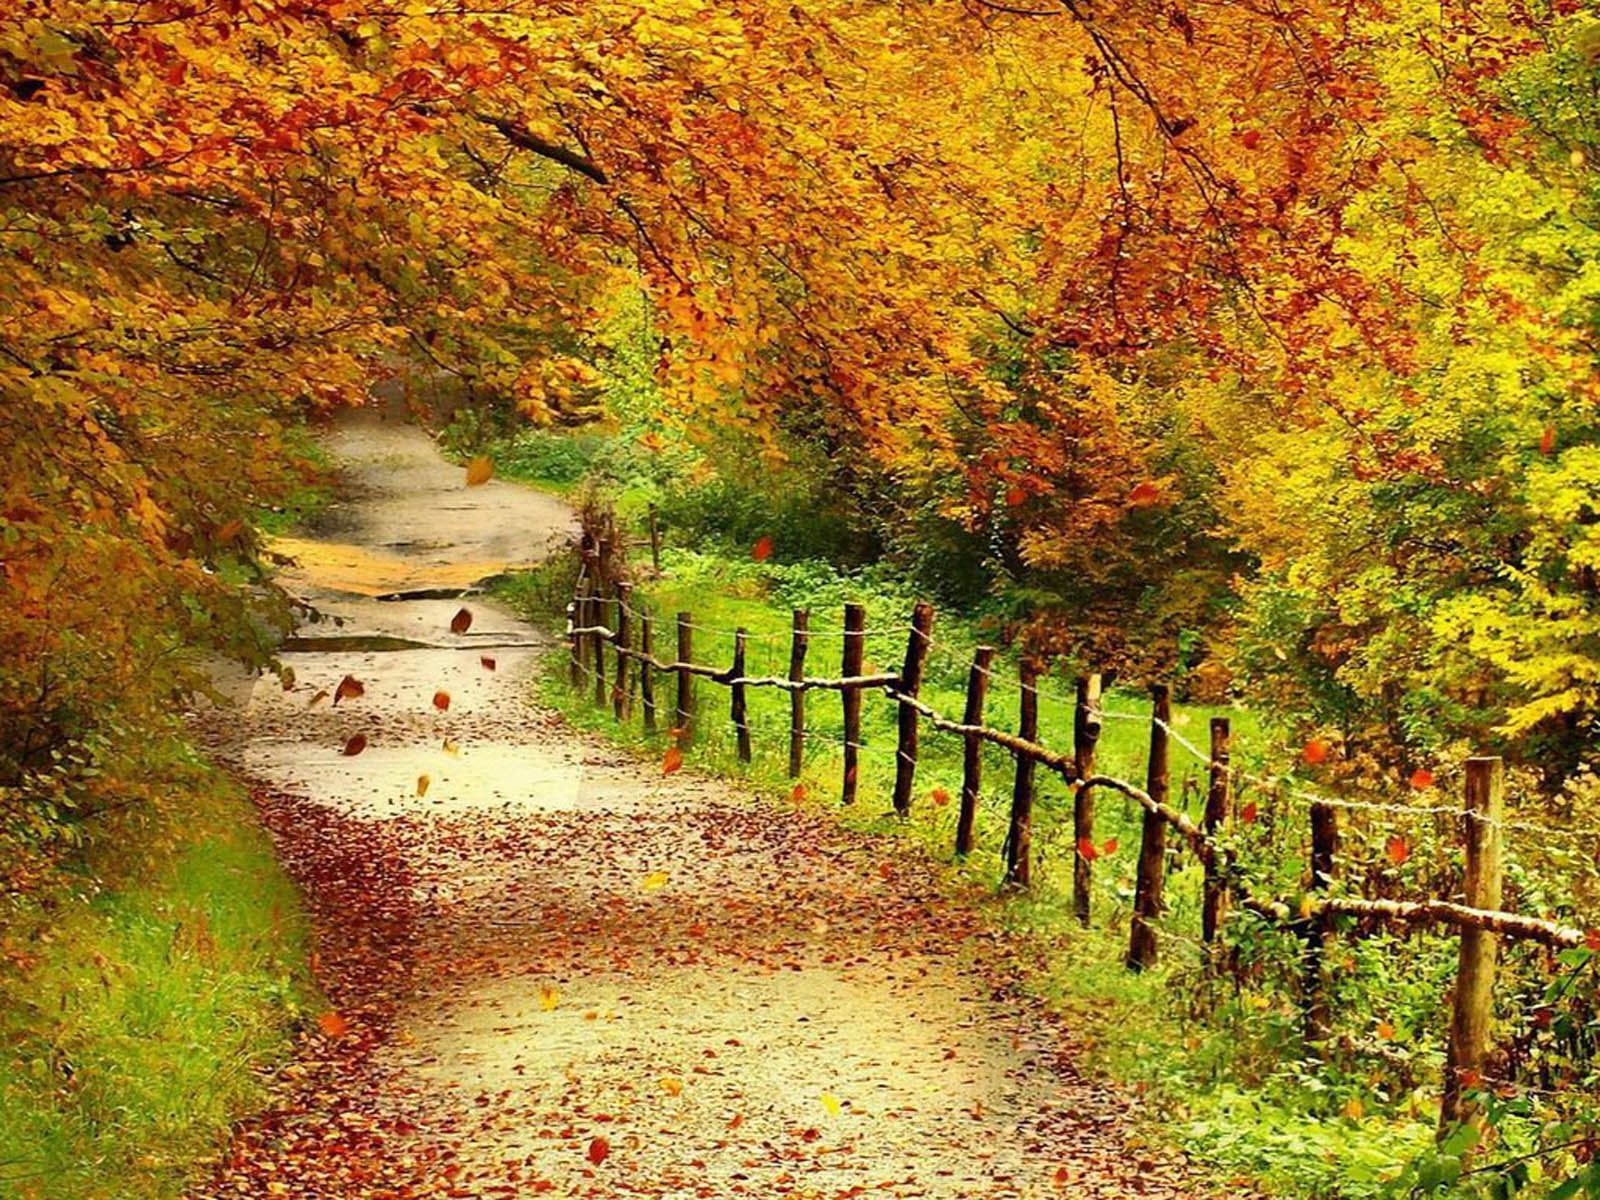 Autumn Scenery Wallpaper Background Photos Image And Pictures